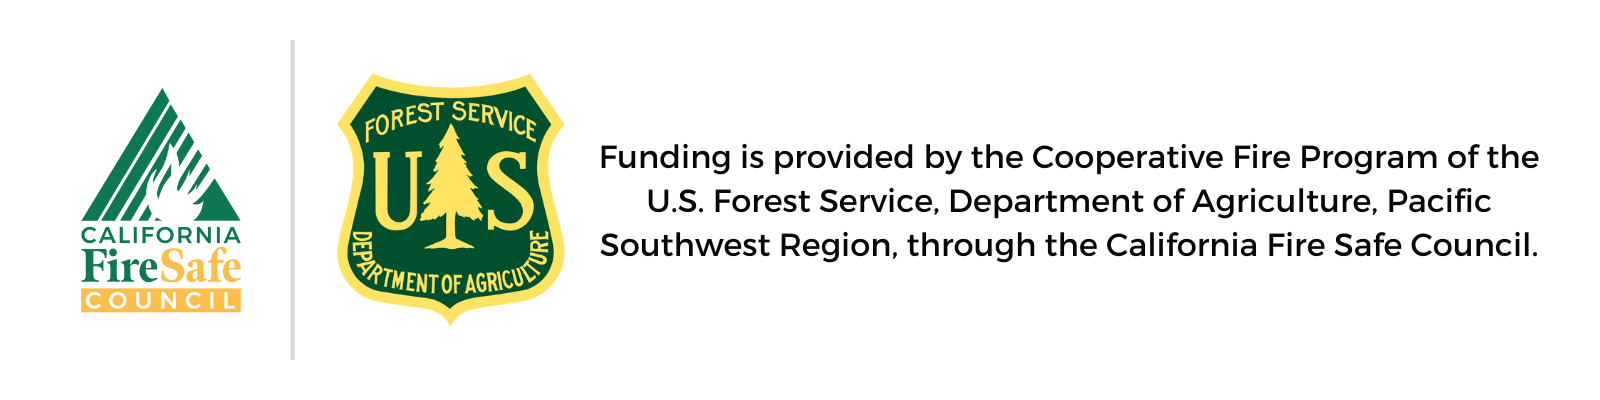 Funding is provided by the Cooperative Fire Program of the U.S. Forest Service, Department of Agriculture, Pacific Southwest Region, through the California Fire Safe Council.